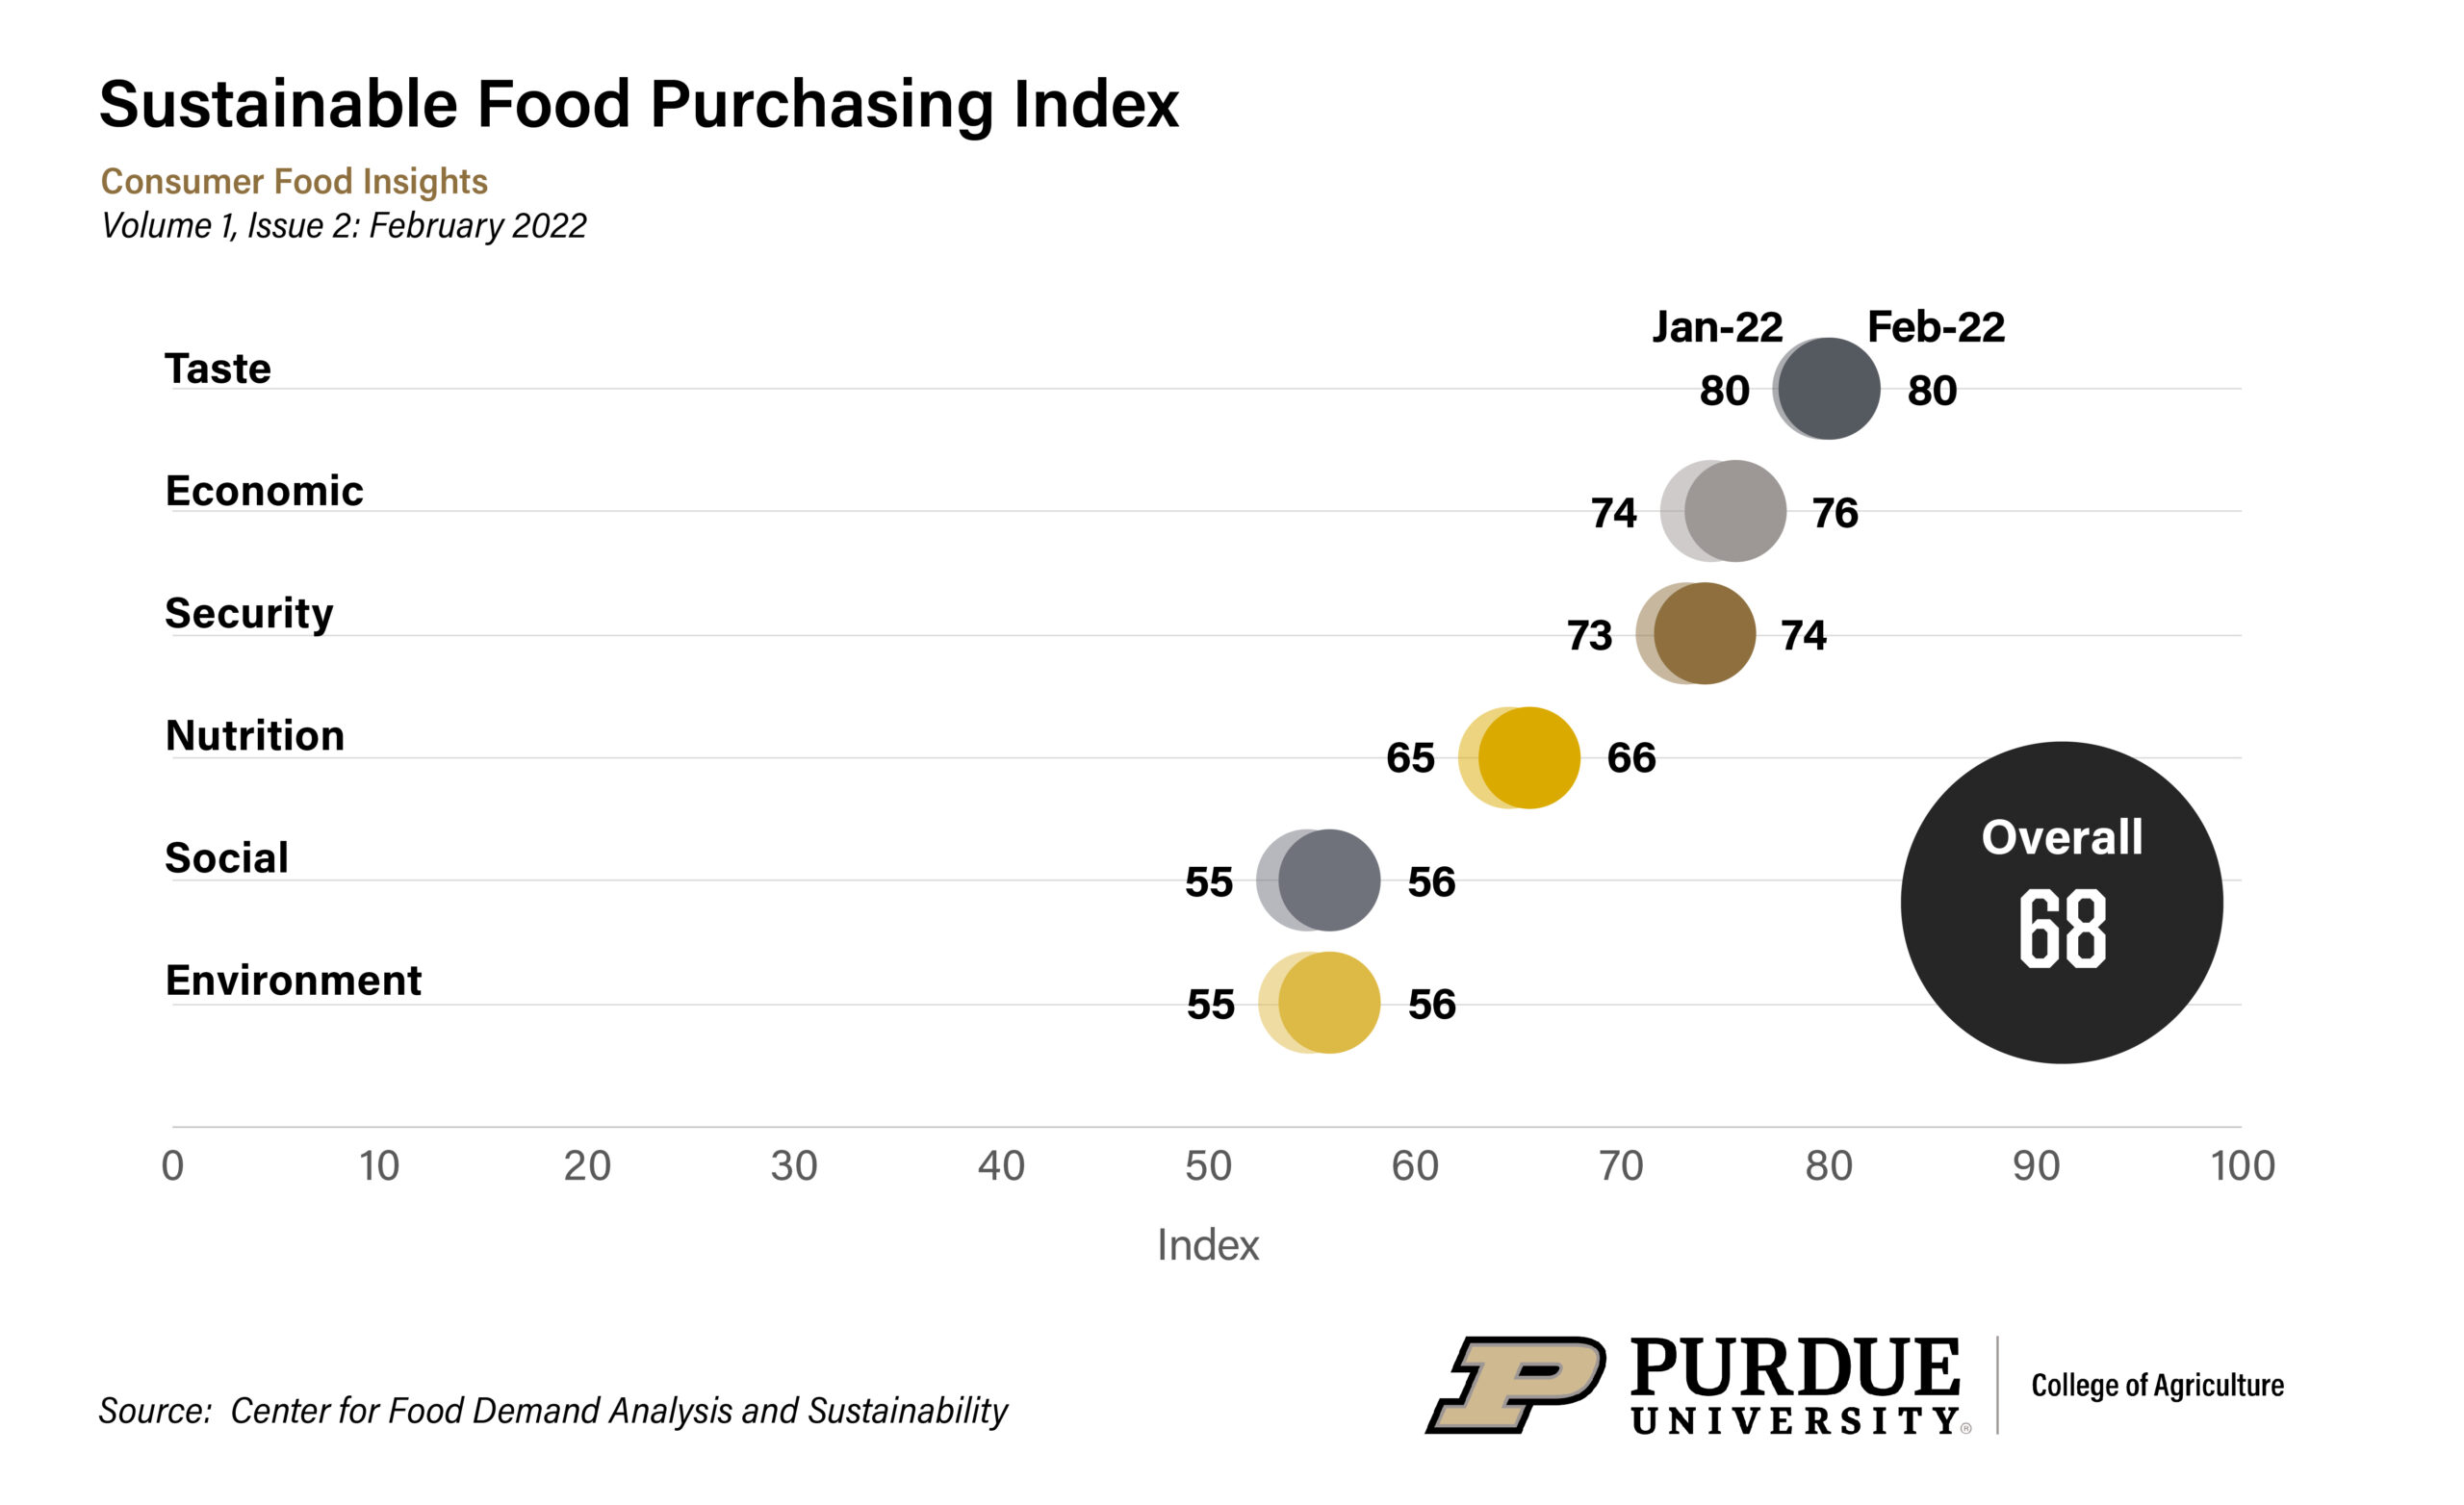 Figure 1. Sustainable Food Purchasing Index